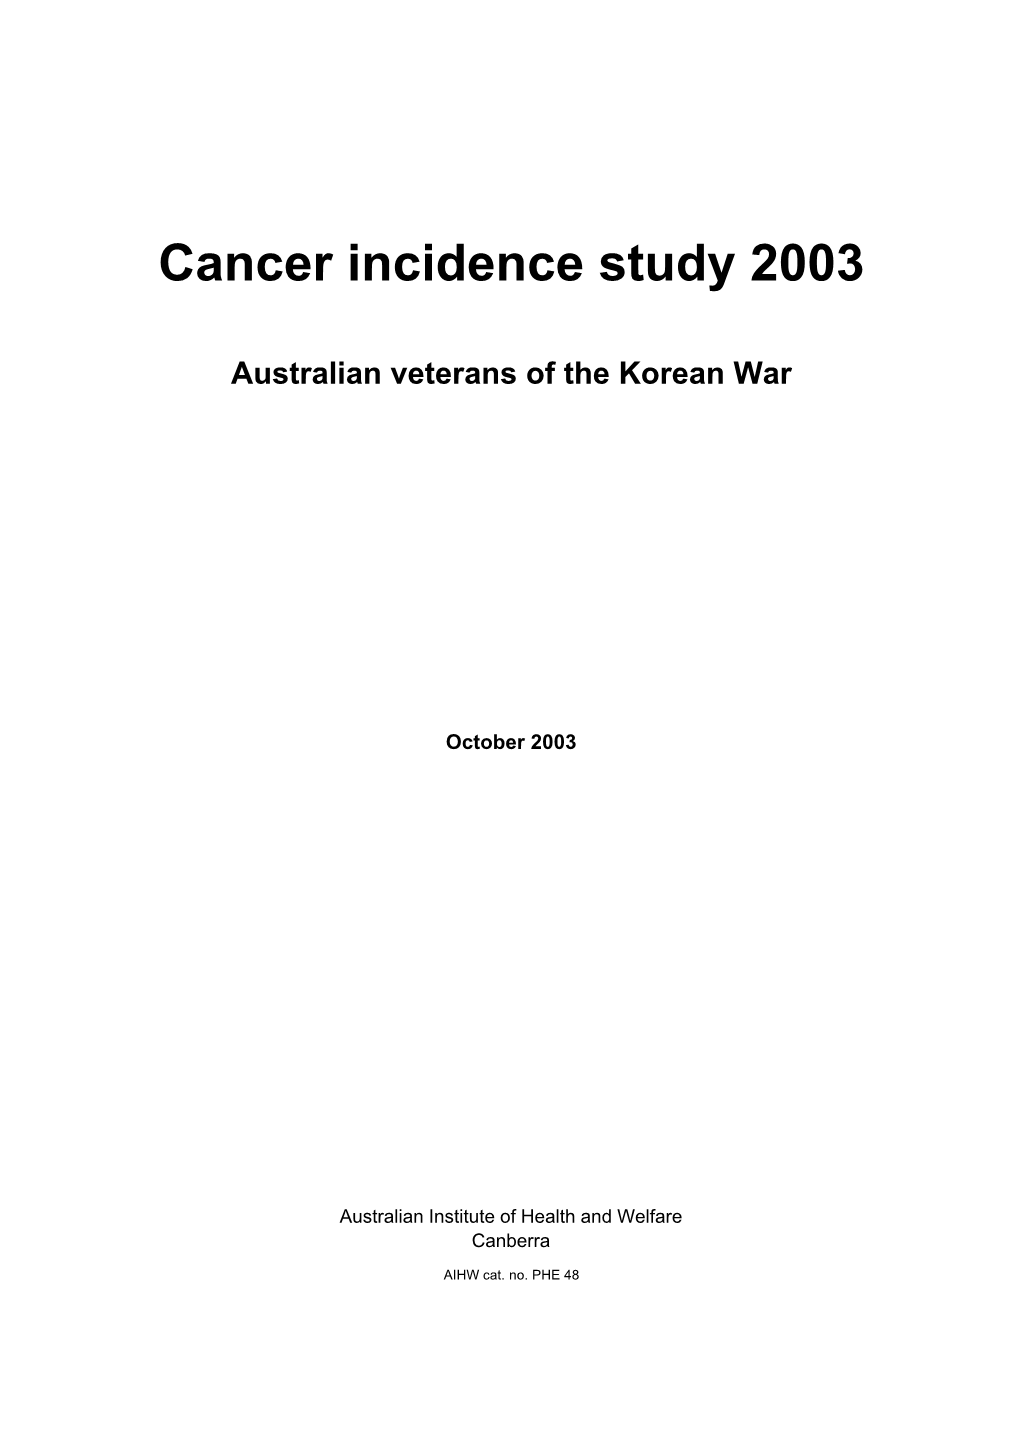 Cancer Incidence Study 2003